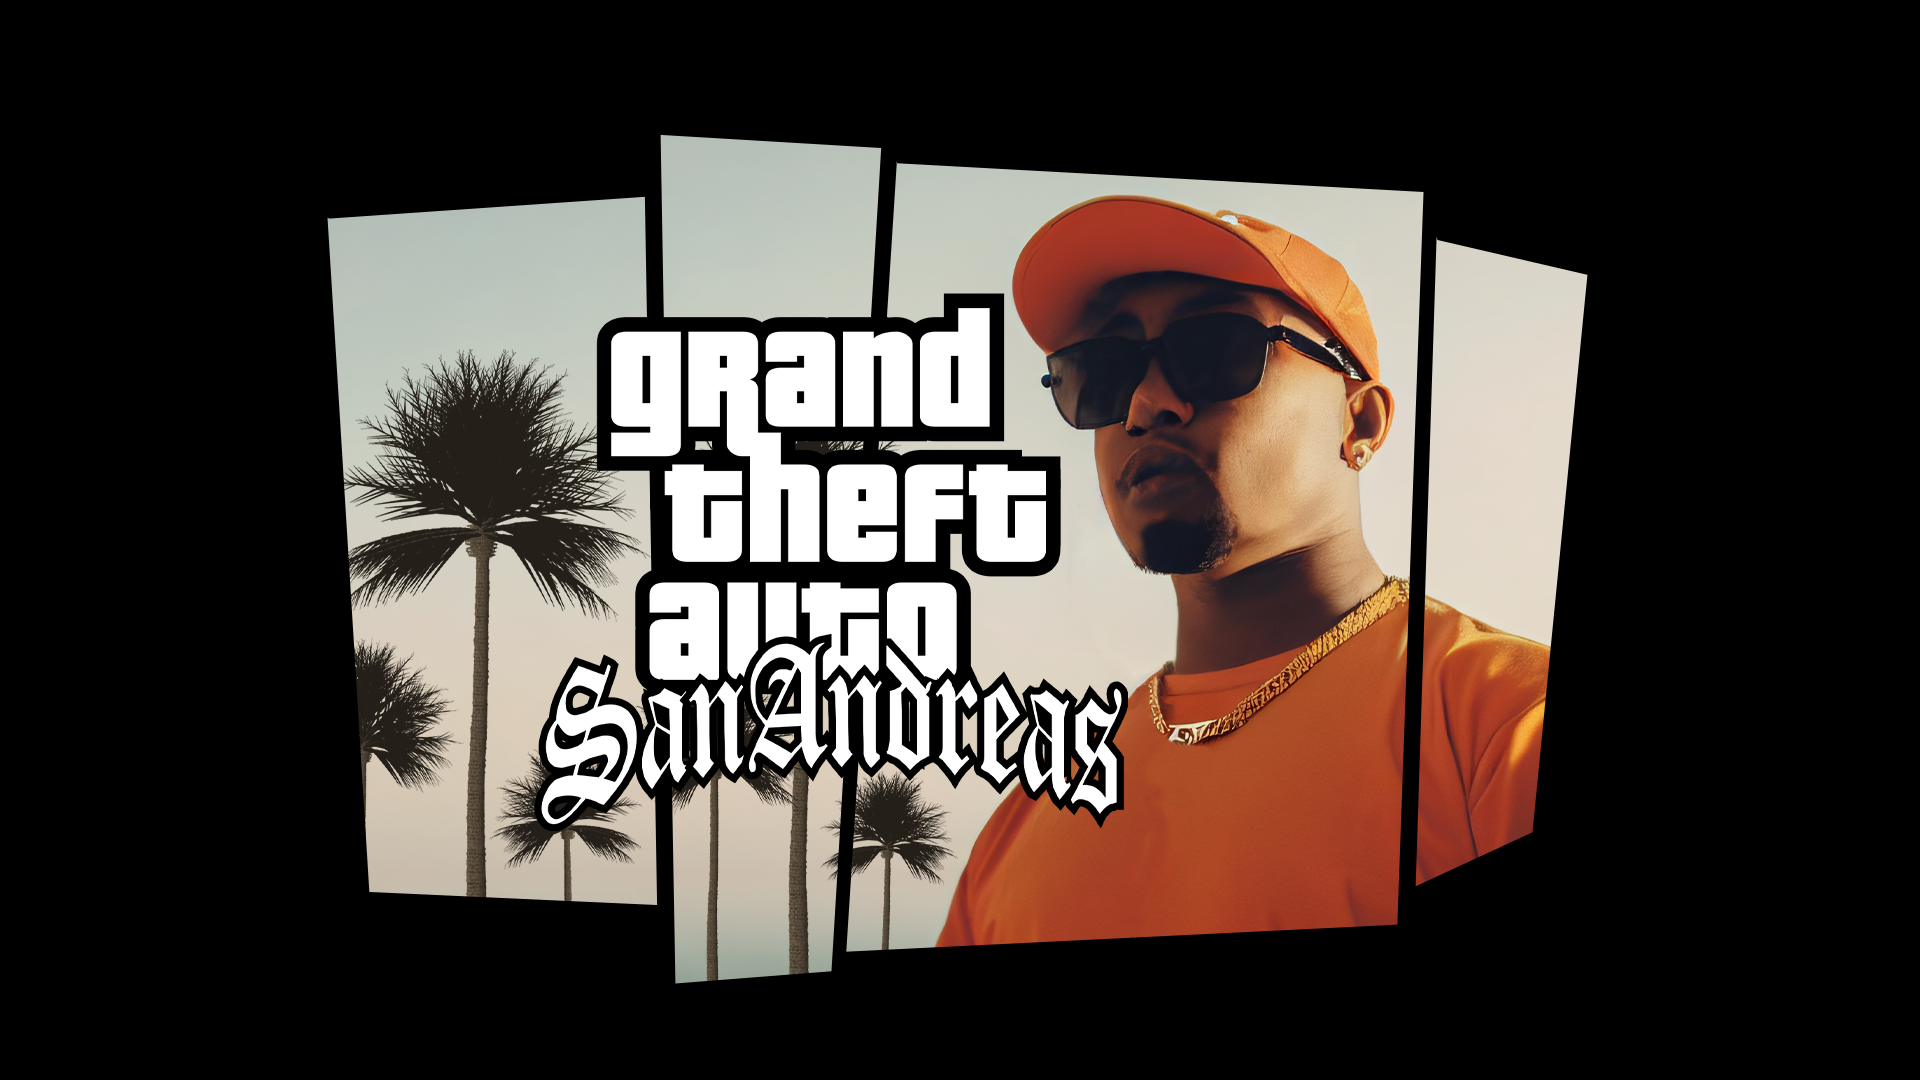 I recreated this GTA: San Andreas wallpaper to make it look more realistic